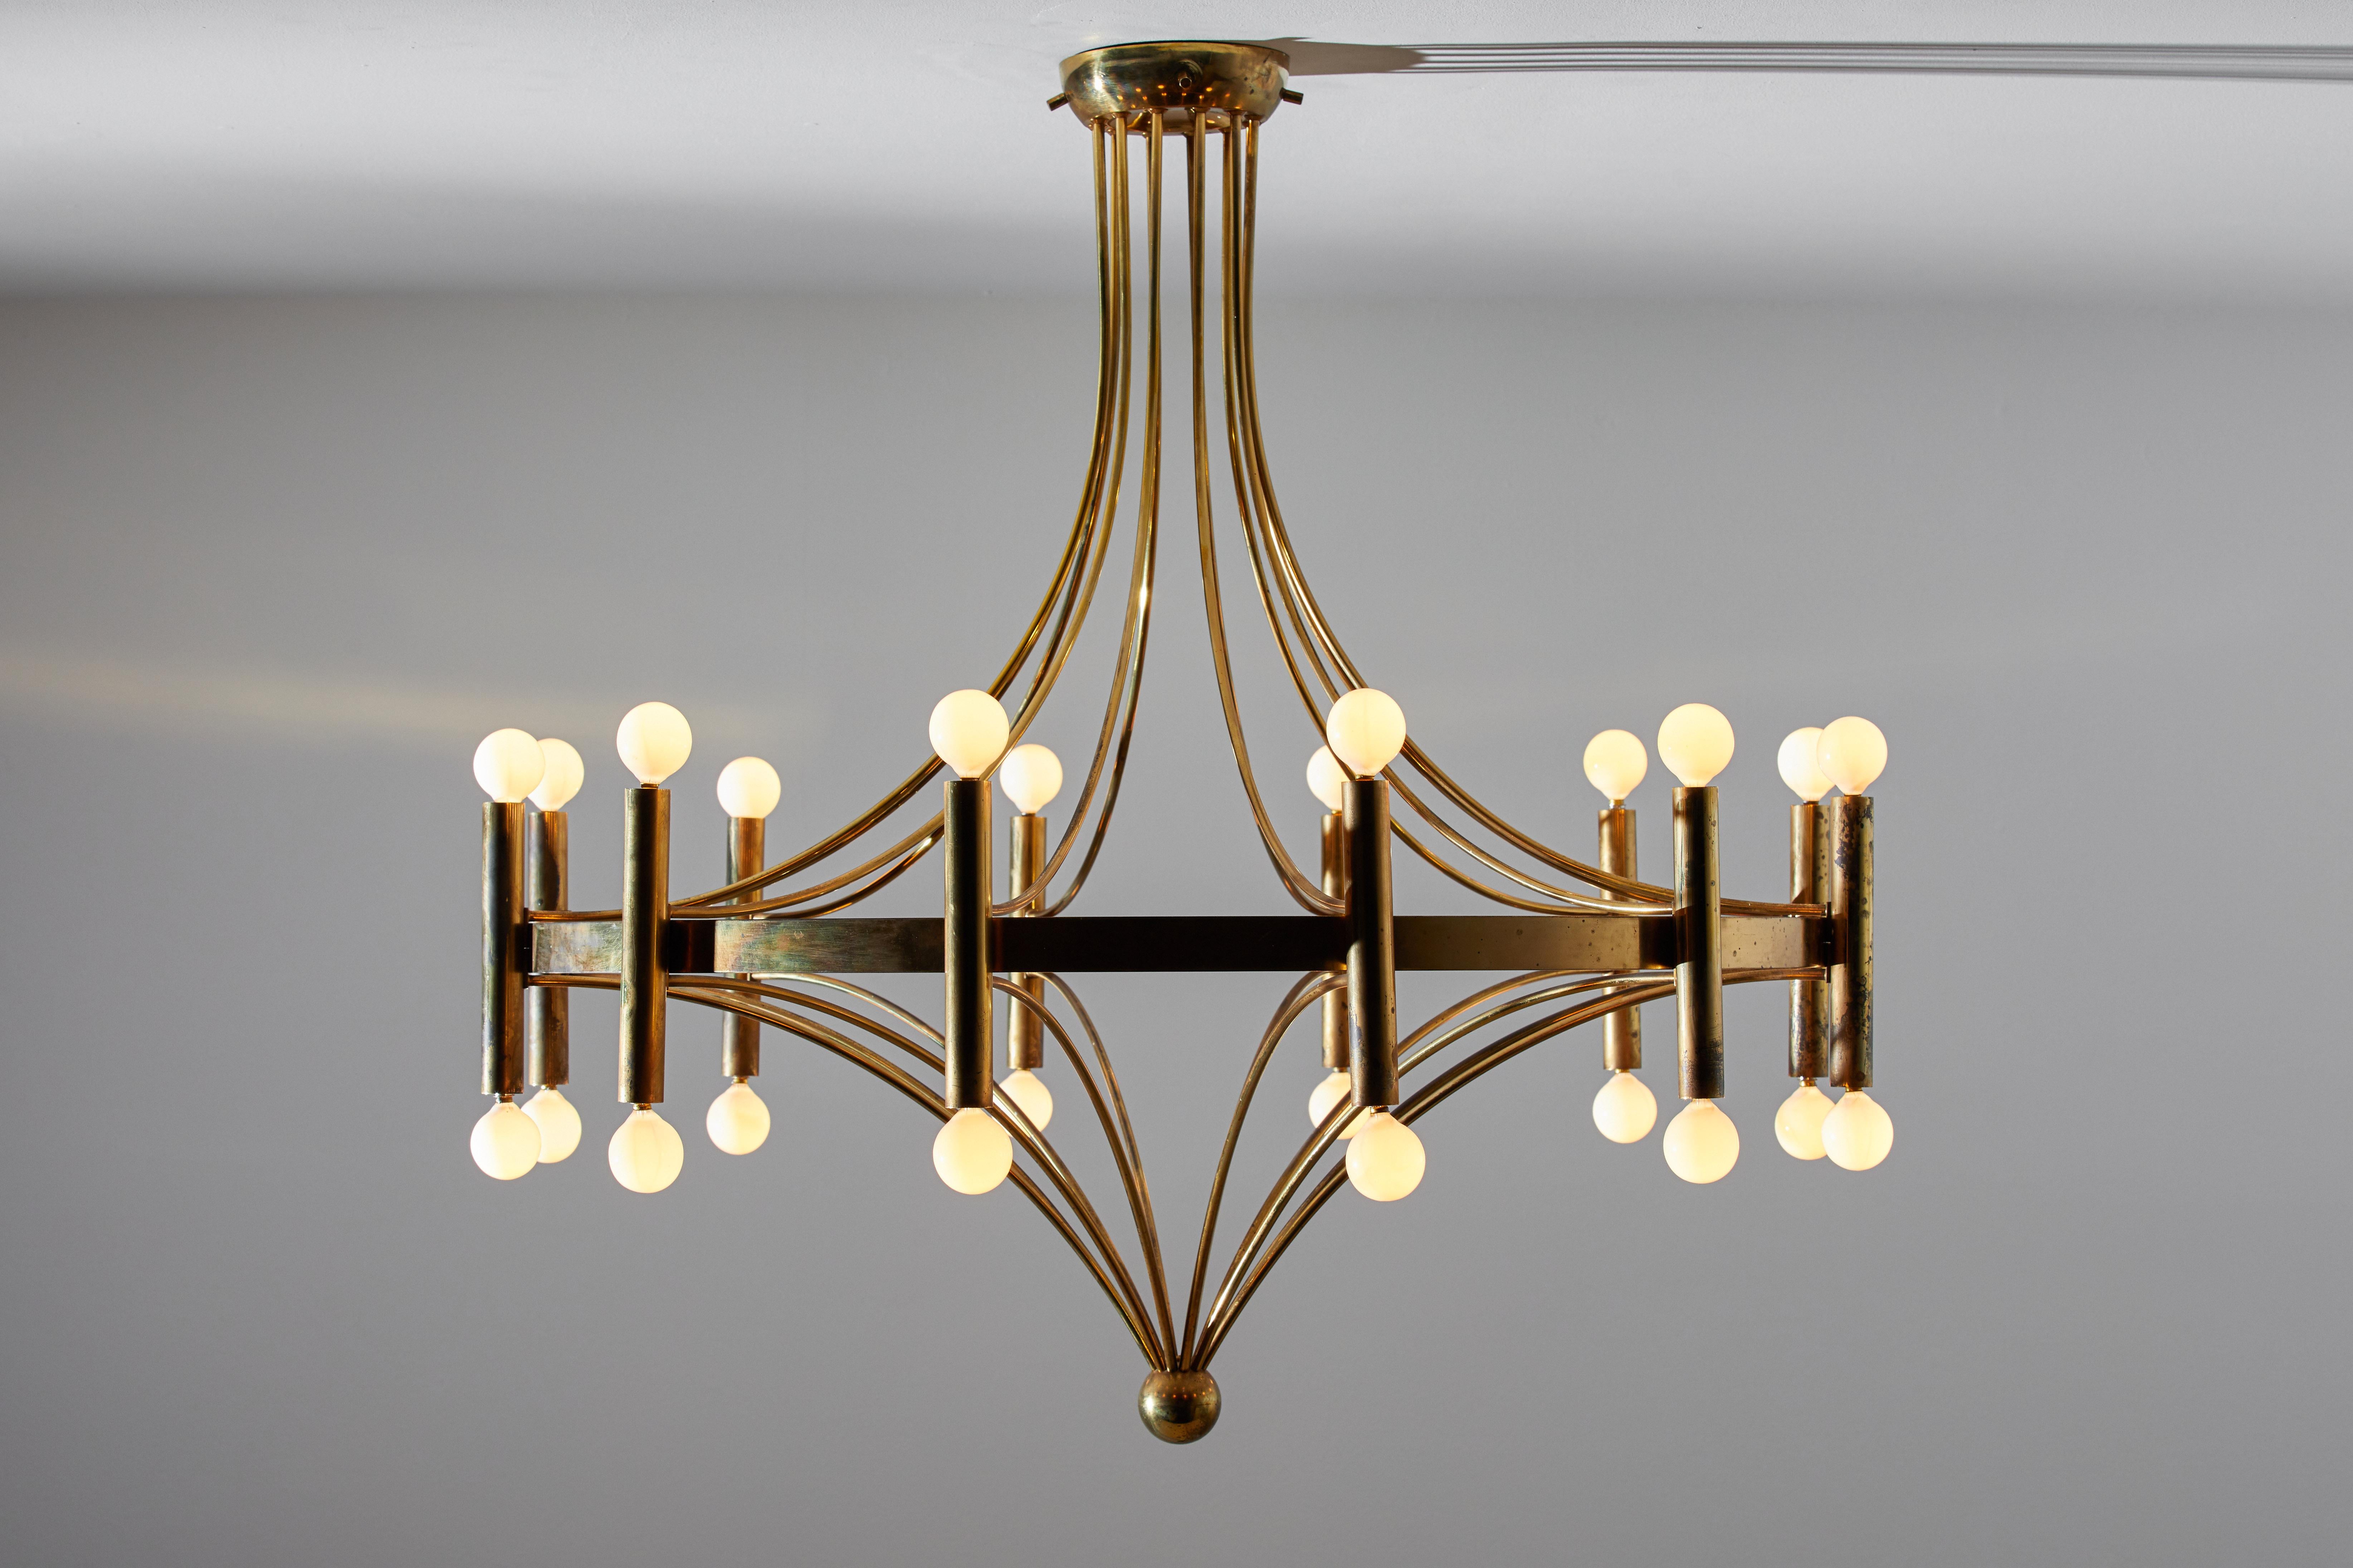  Suspension Light by Stilnovo. Manufactured in Italy circa 1950's. Rare, custom high quality production. Brass, Rewired for U.S. junction boxes. Takes twenty four E27 25w candelabra bulbs. Bulbs provided as a one time courtesy.